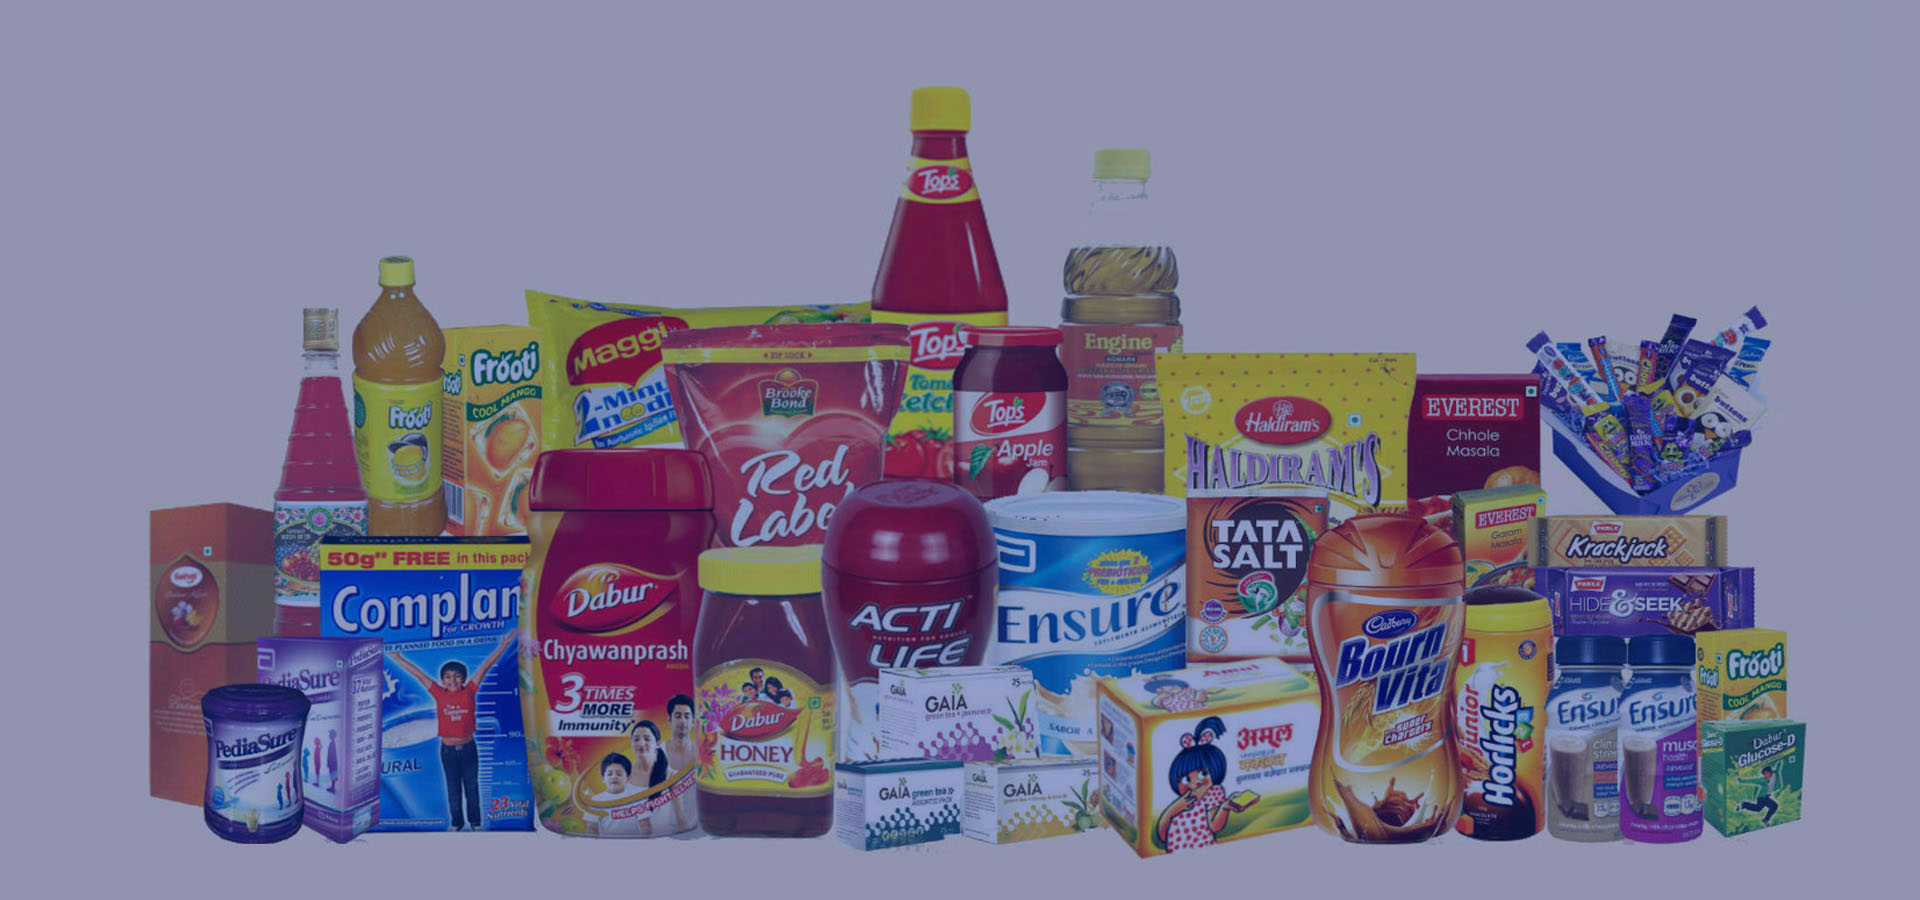 FMCG PRODUCTS